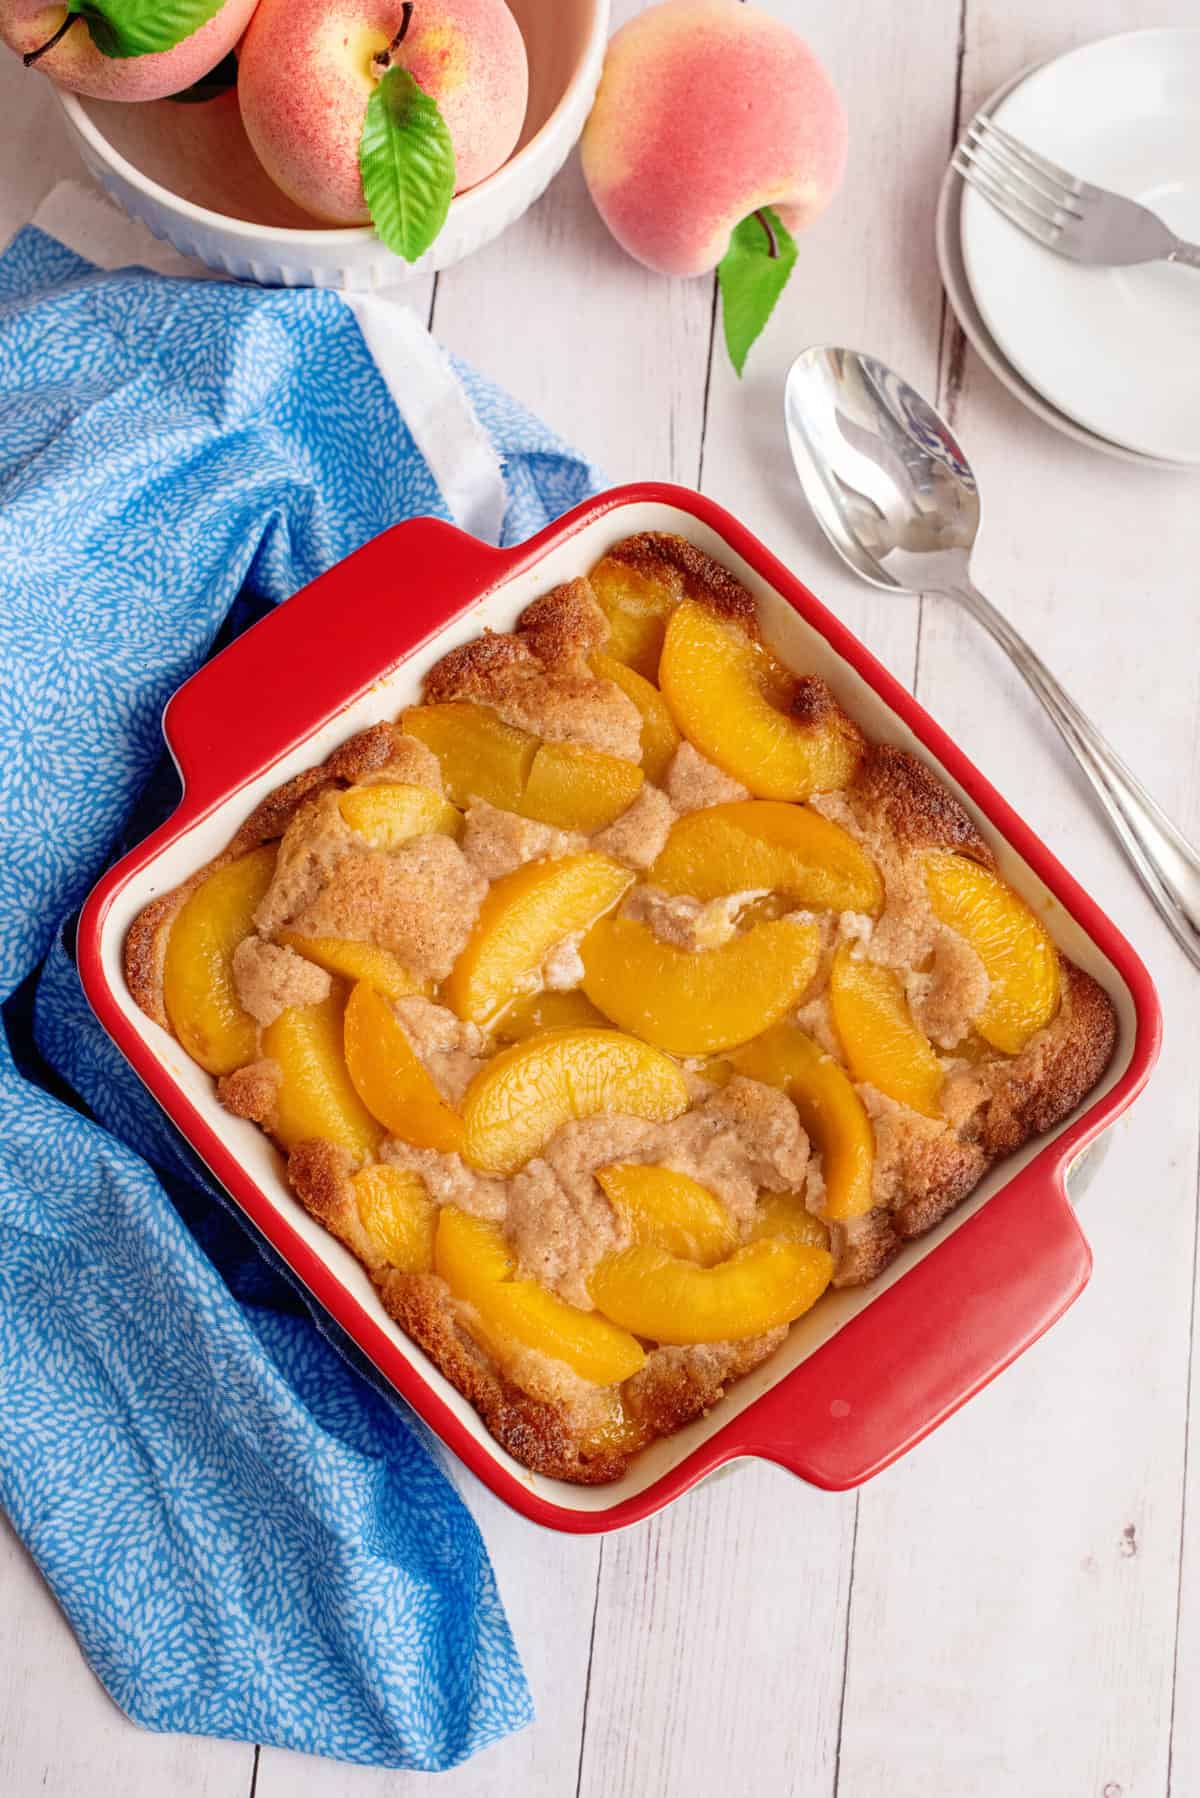 Baked old-fashioned peach cobbler.